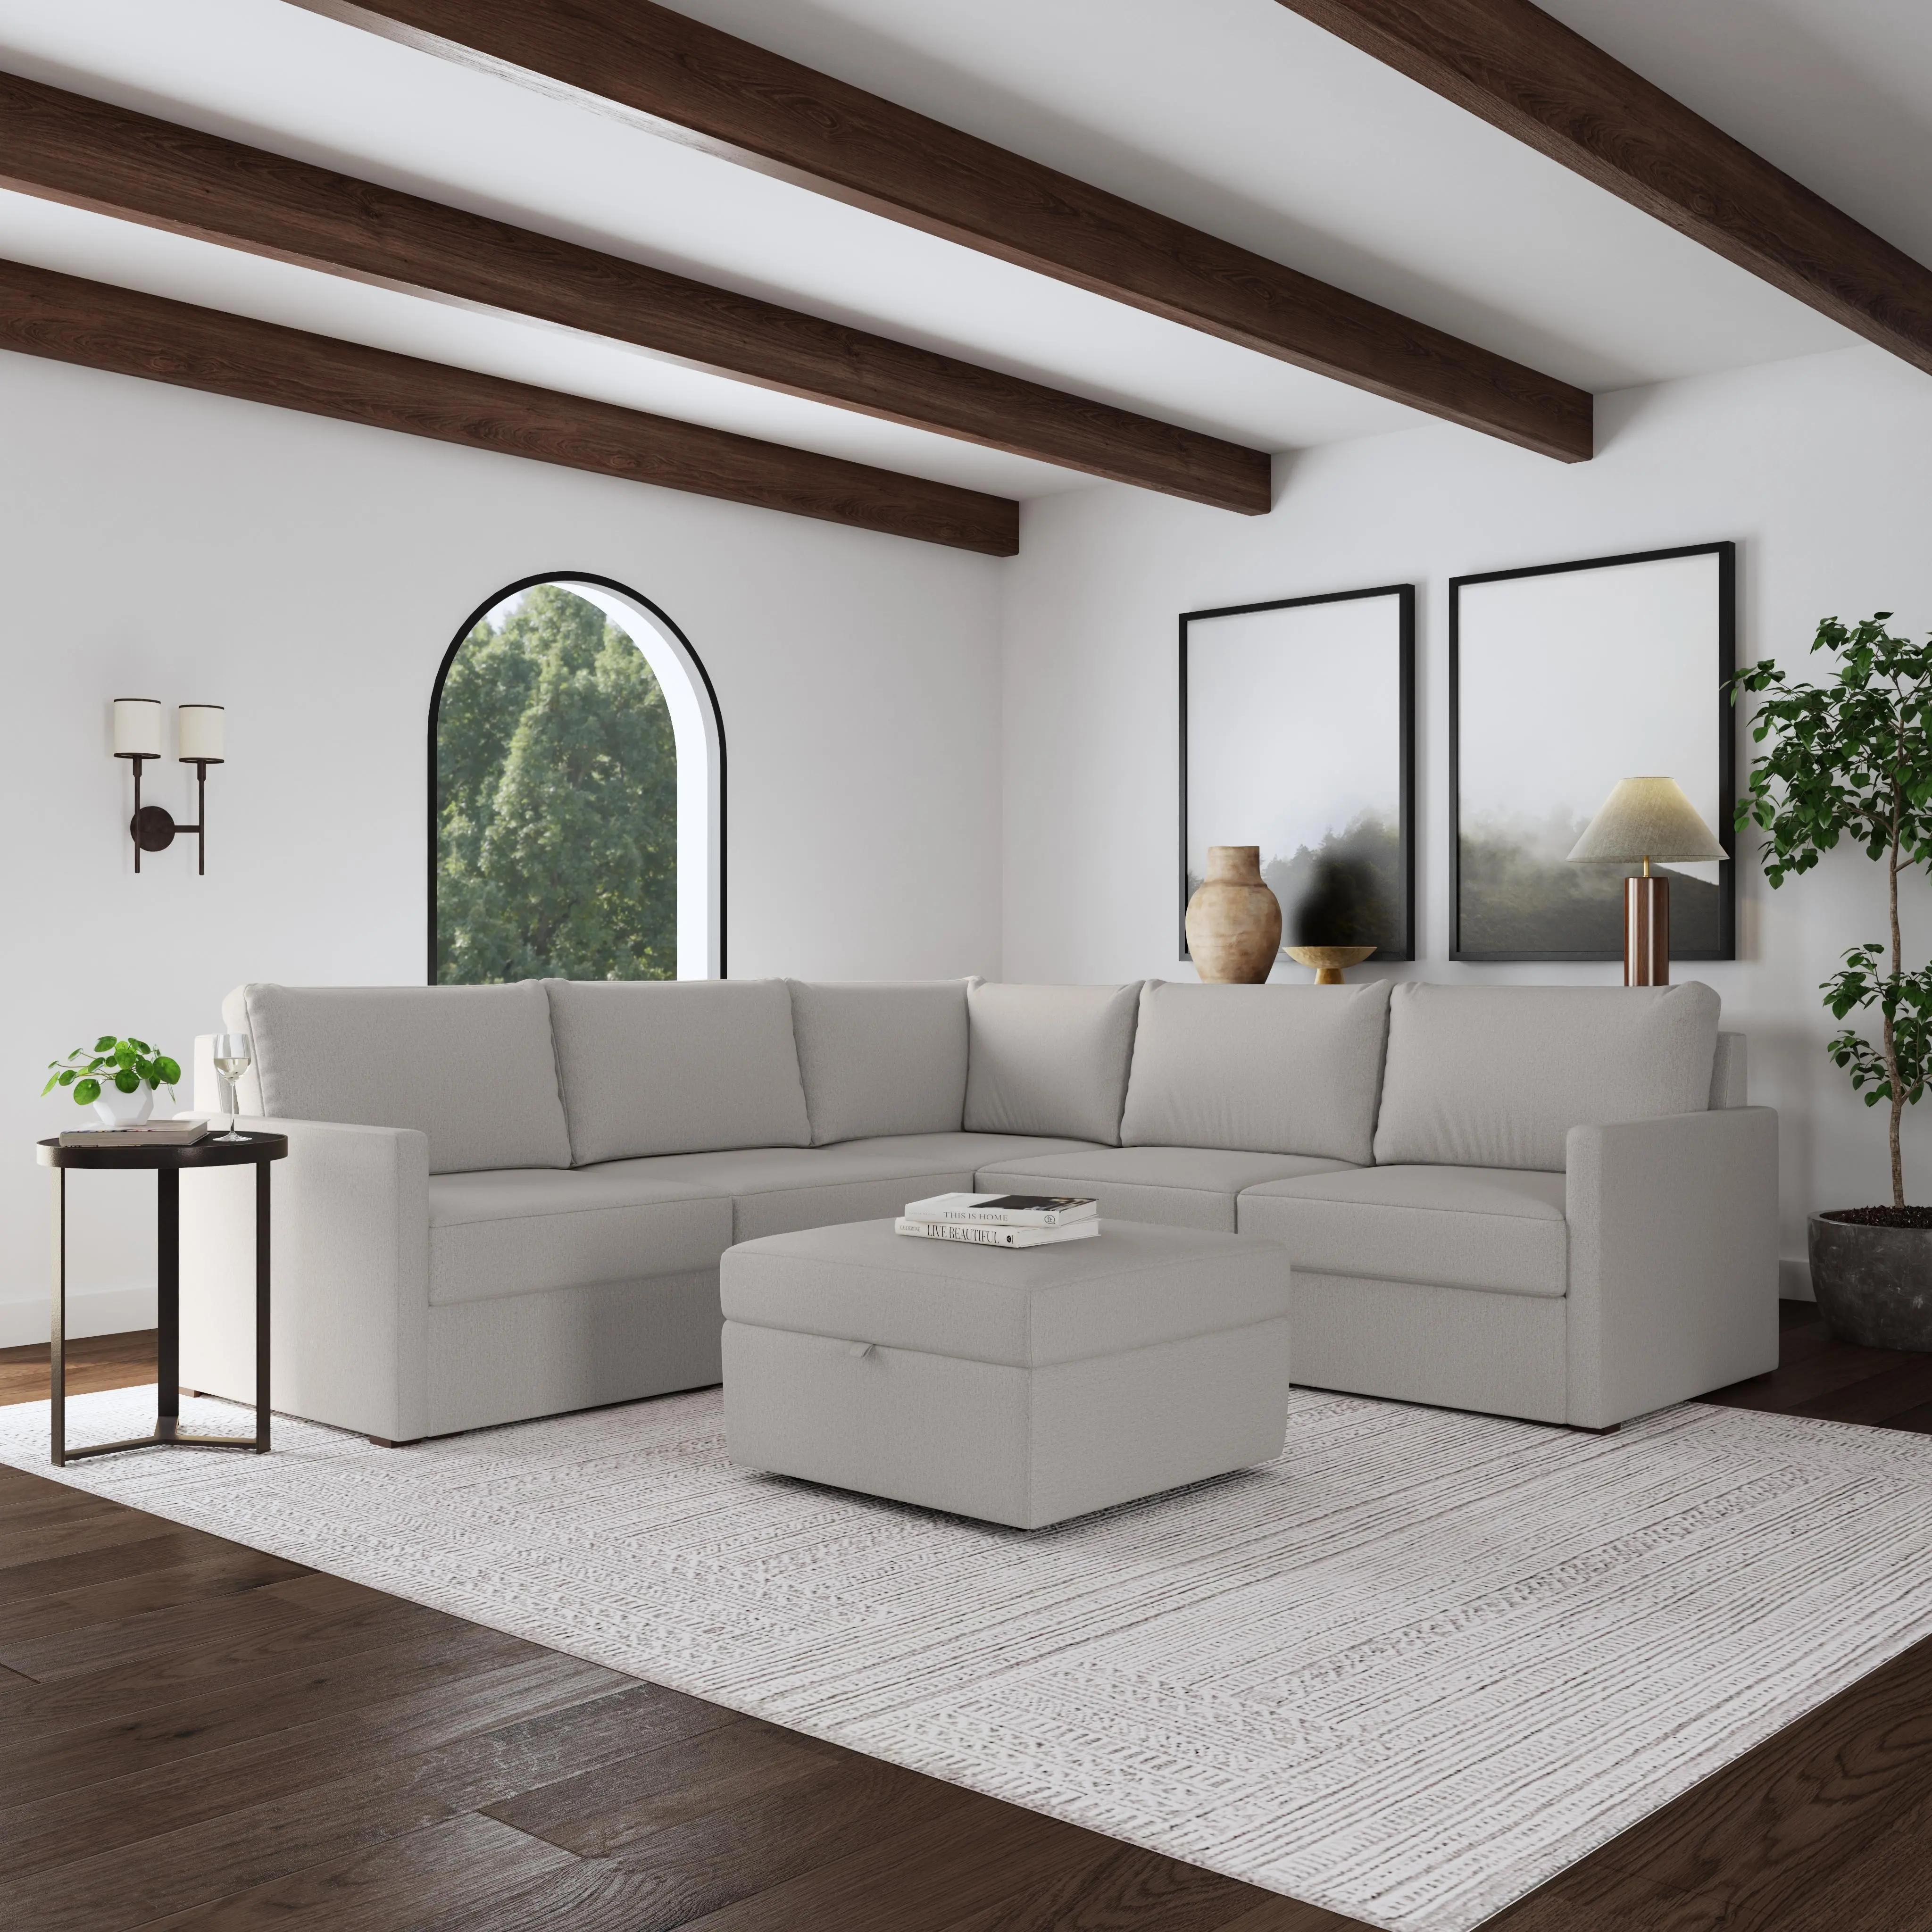 Flex Taupe 5-Seat Modular Sectional with Narrow Arm and Storage...